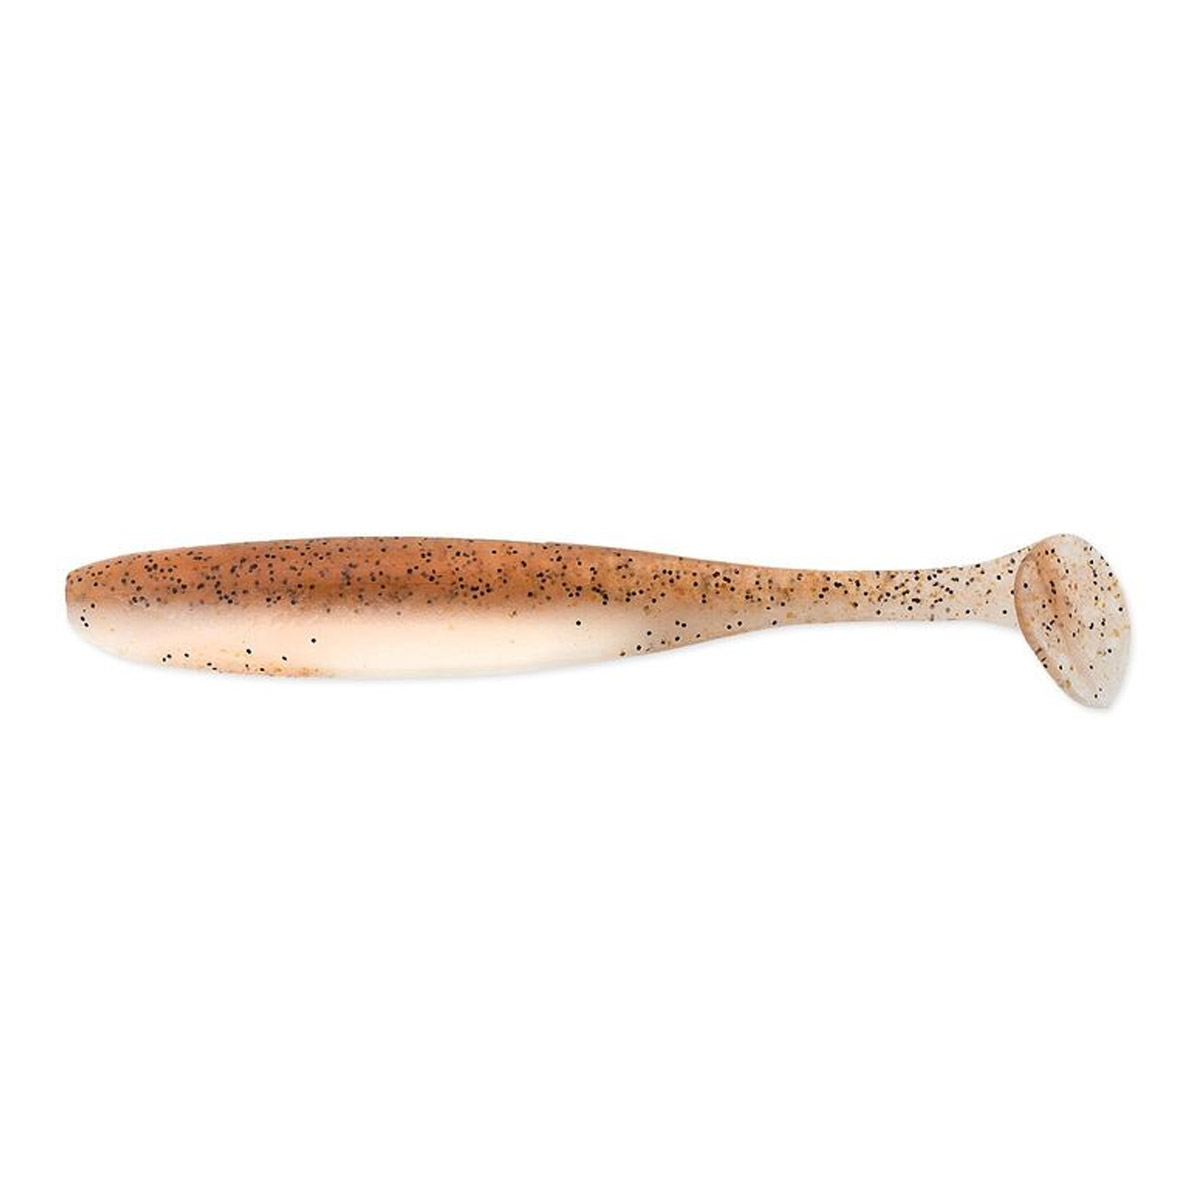 Keitech Easy Shiner 5 inch -  Natural Craw